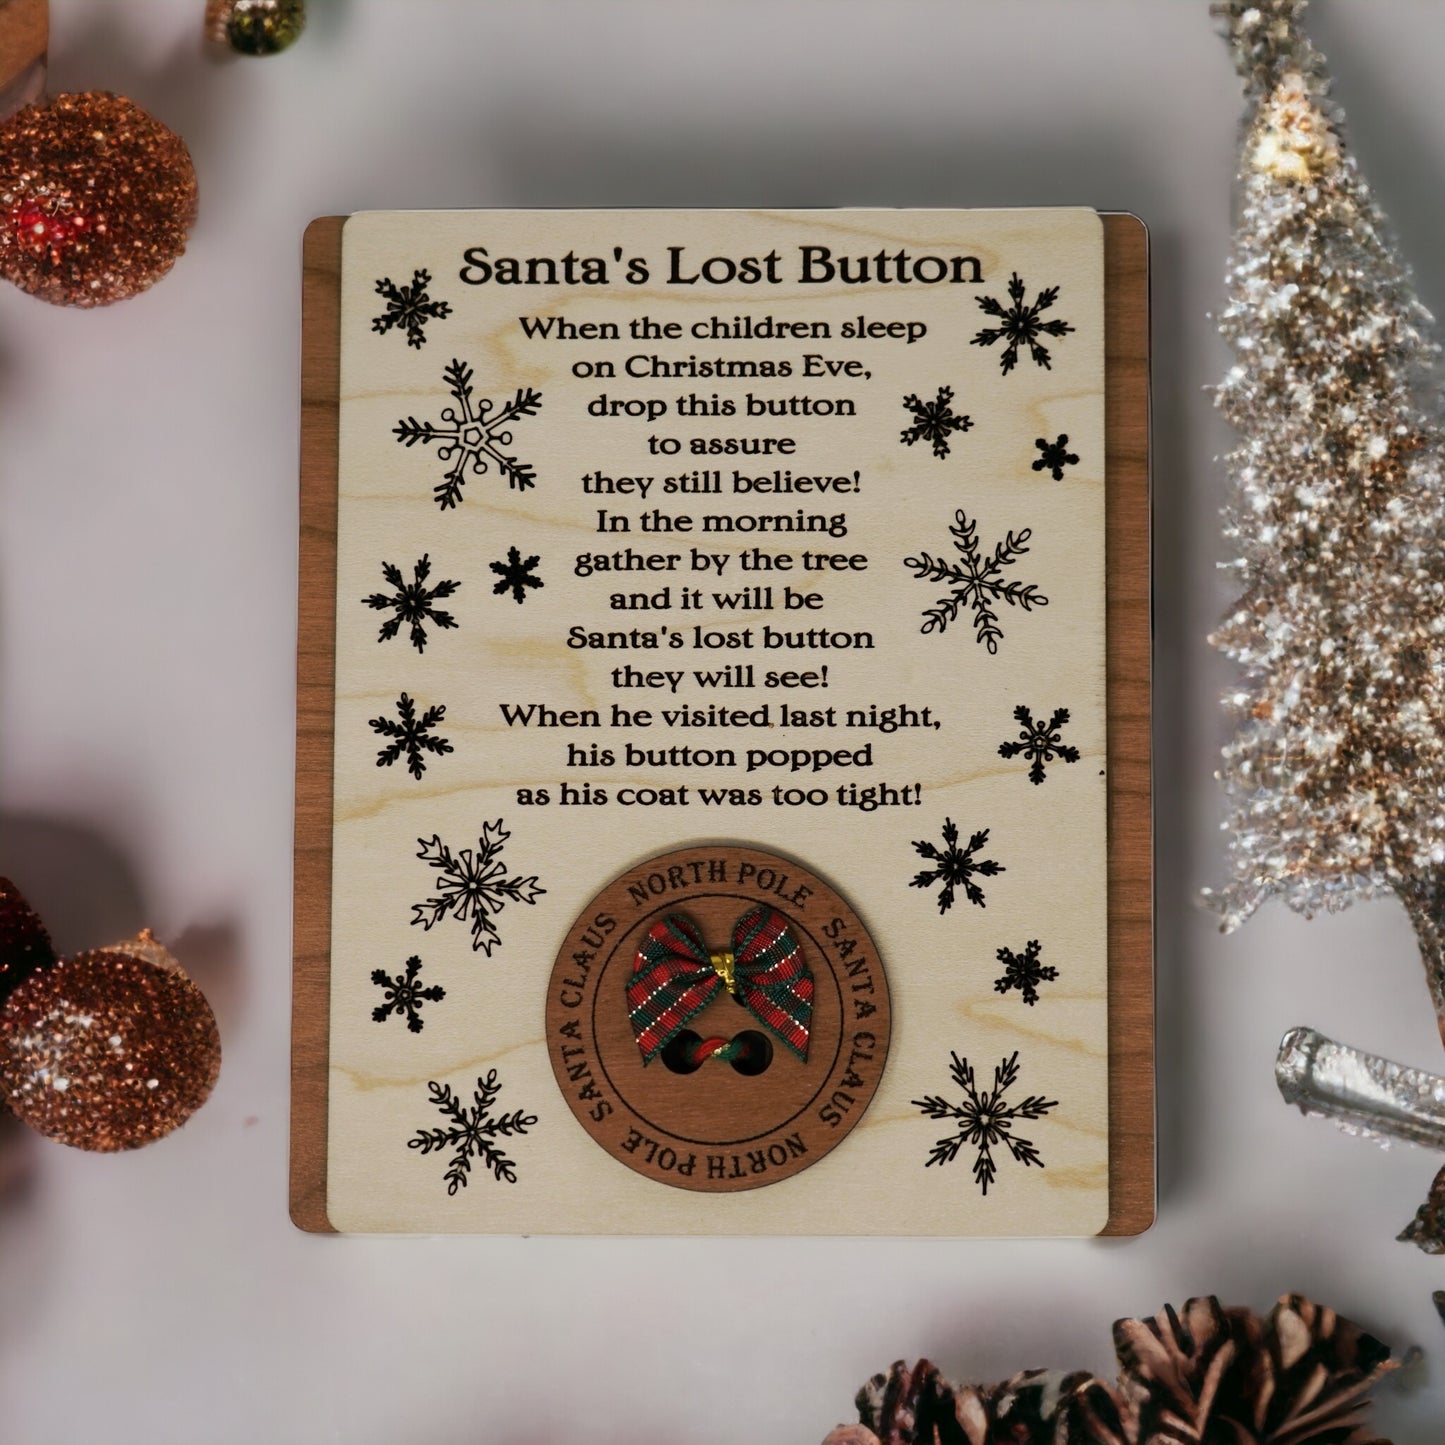 Santas Magical Lost Button, Custom Keepsake Family Gift, Kids Christmas Ornament, Present for Child from Santa, Xmas Traditions for Families